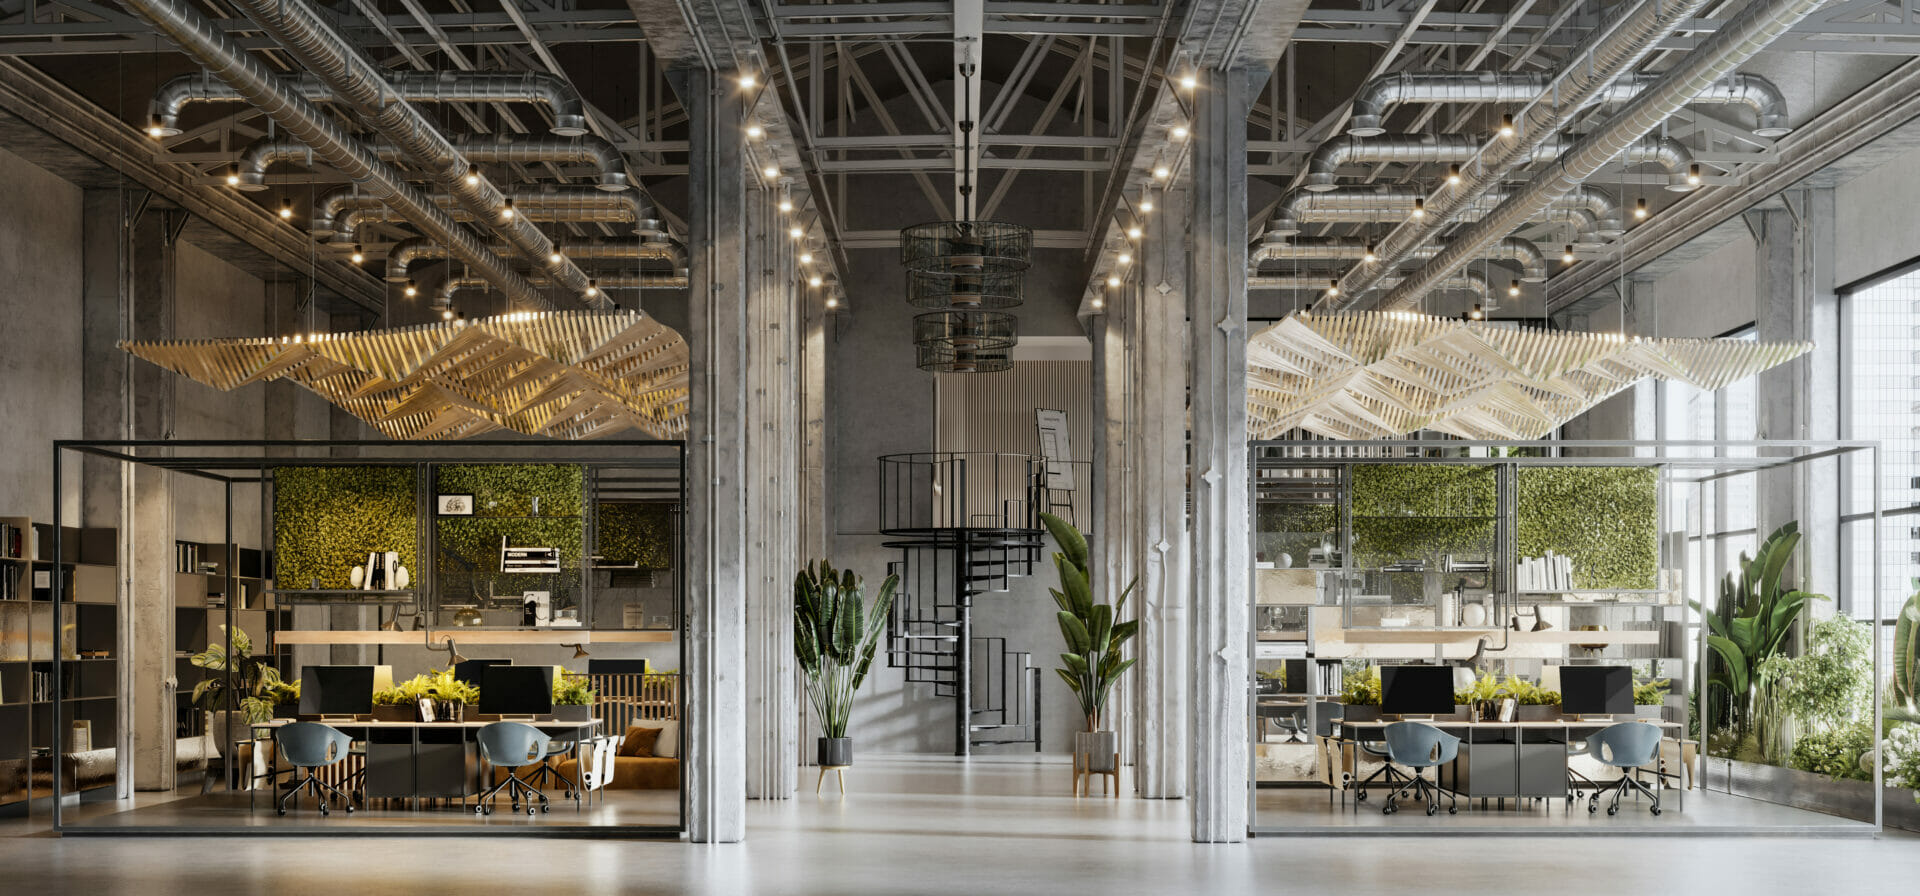 New Trends in Co-working Spaces